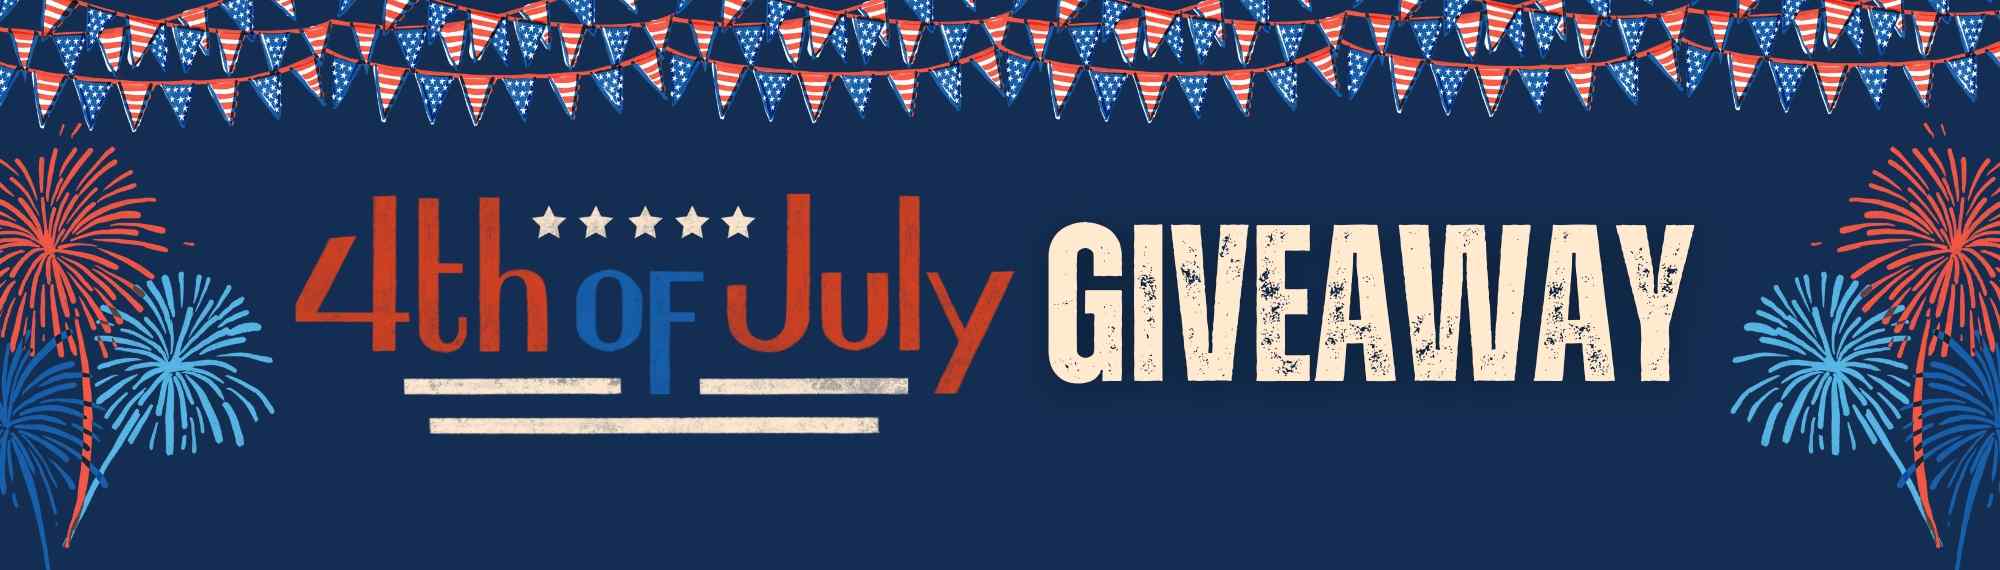 Decorative image. 4th of July Giveaway. Features fireworks and red, white and blue colors. 